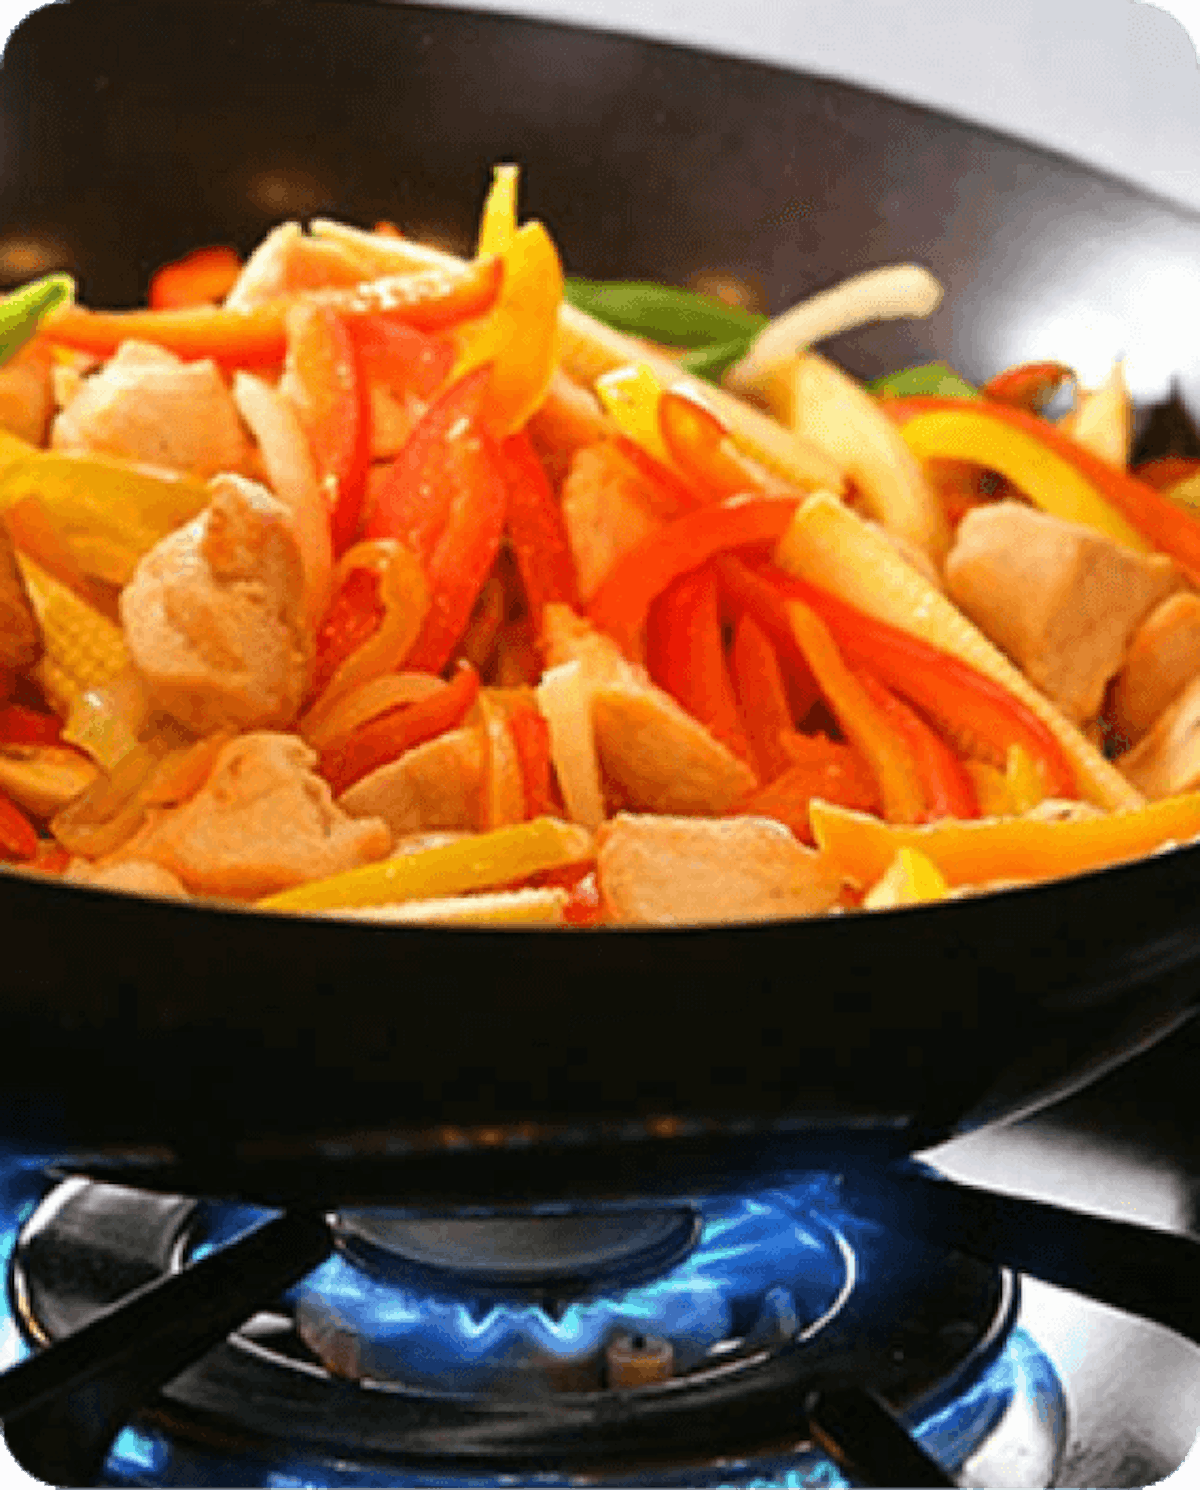 picture of a diced vegetables inside a frying pan on fire